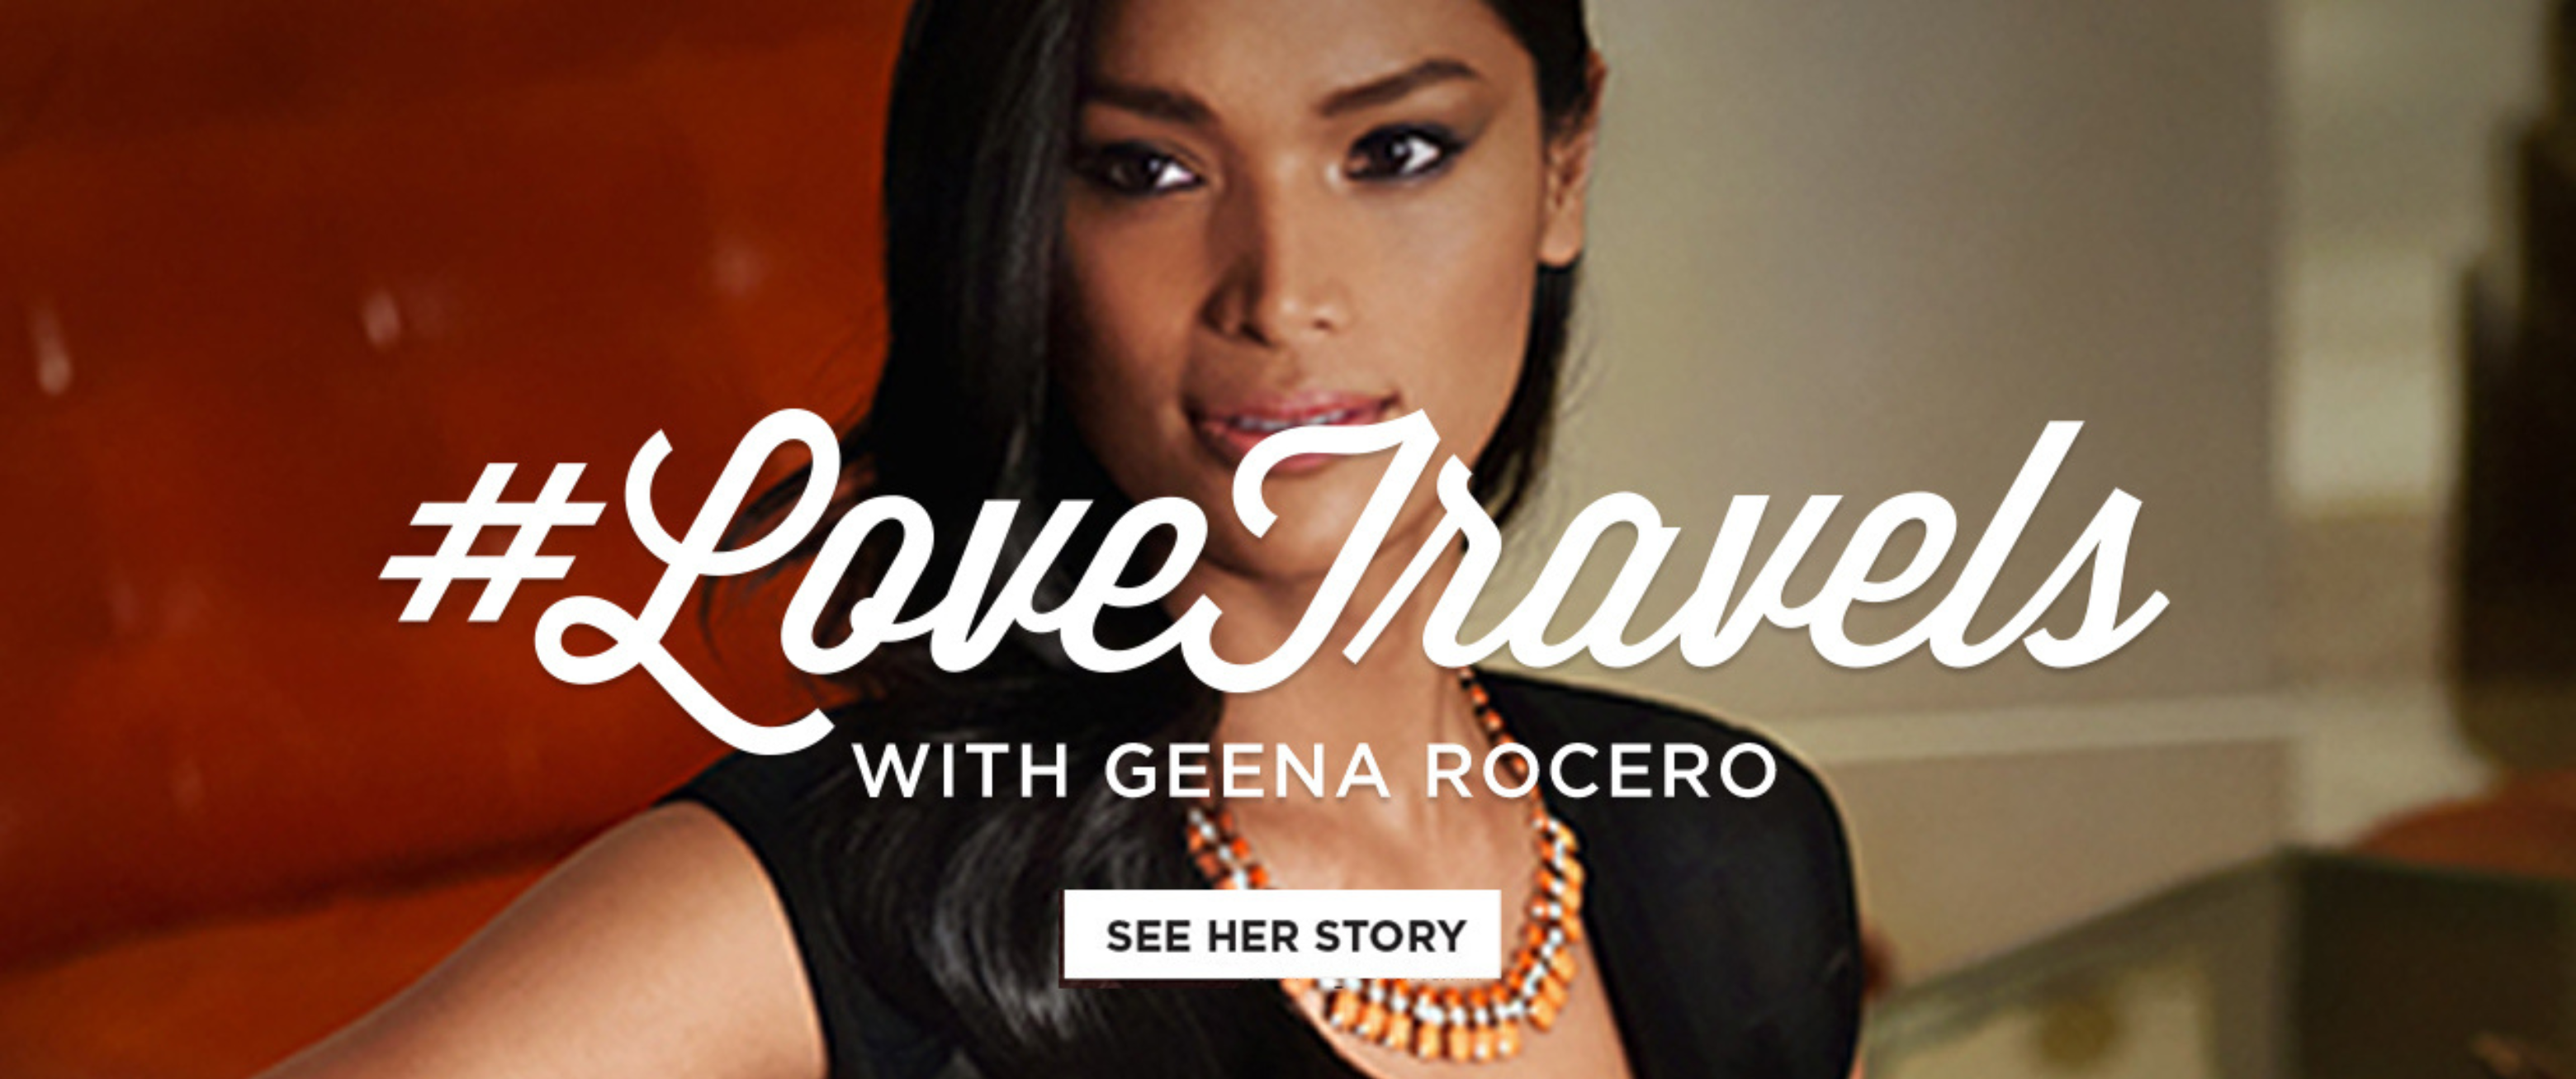 Load video: Film of Geena Rocera for Marriott&#39;s Love Travels campaign